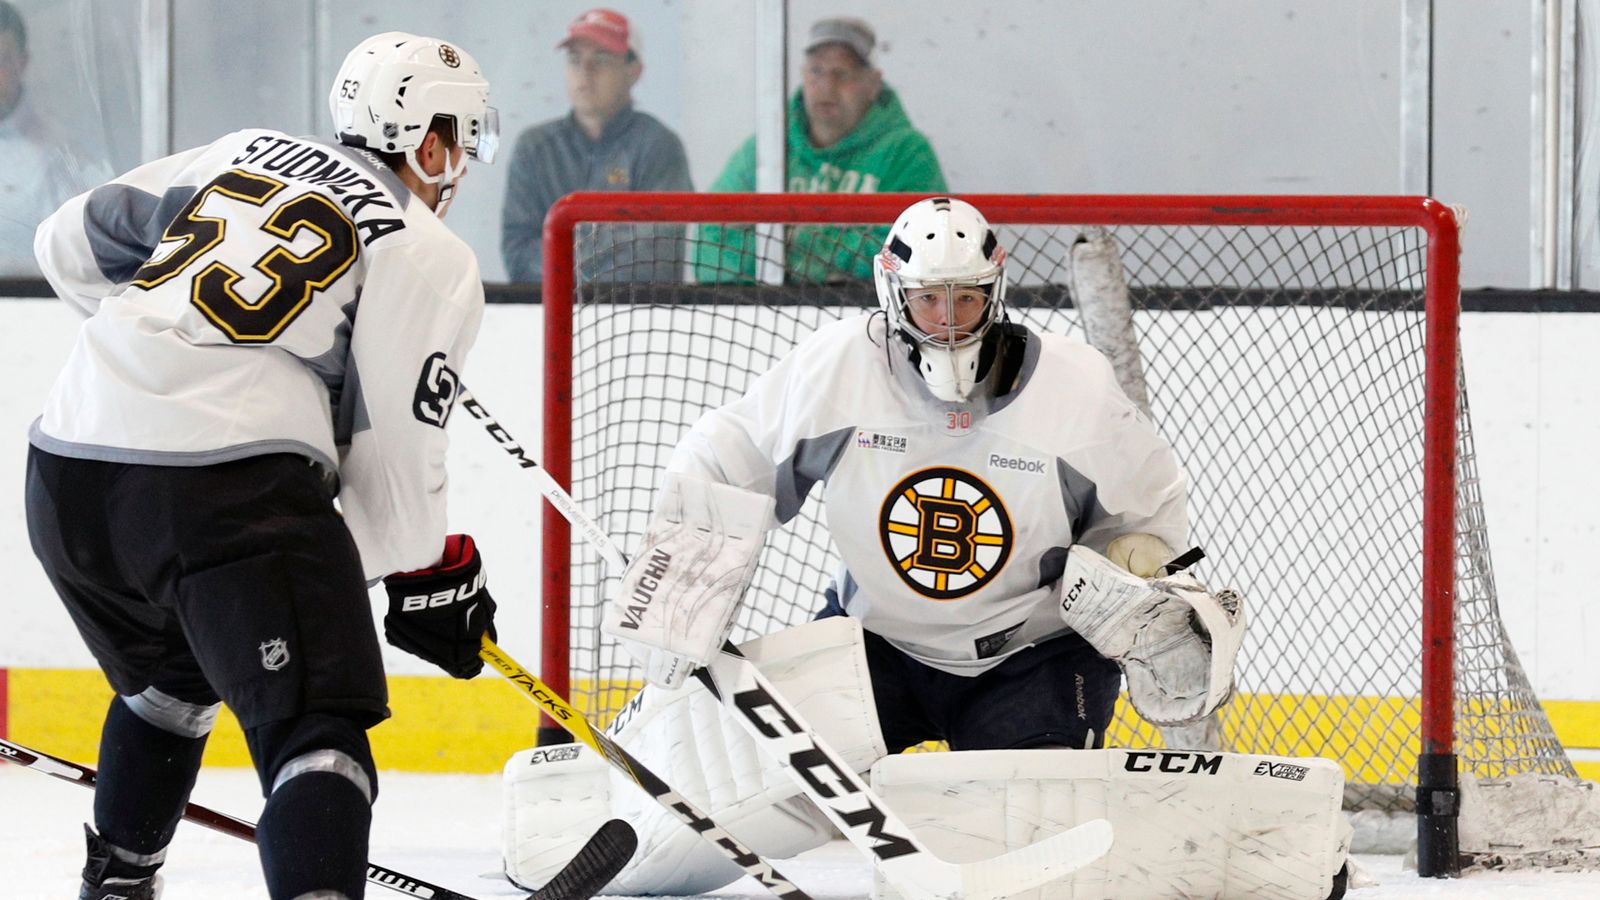 Bruins Notebook What to watch for at Development Camp, 5 takeaways from 2019-20 schedule and more